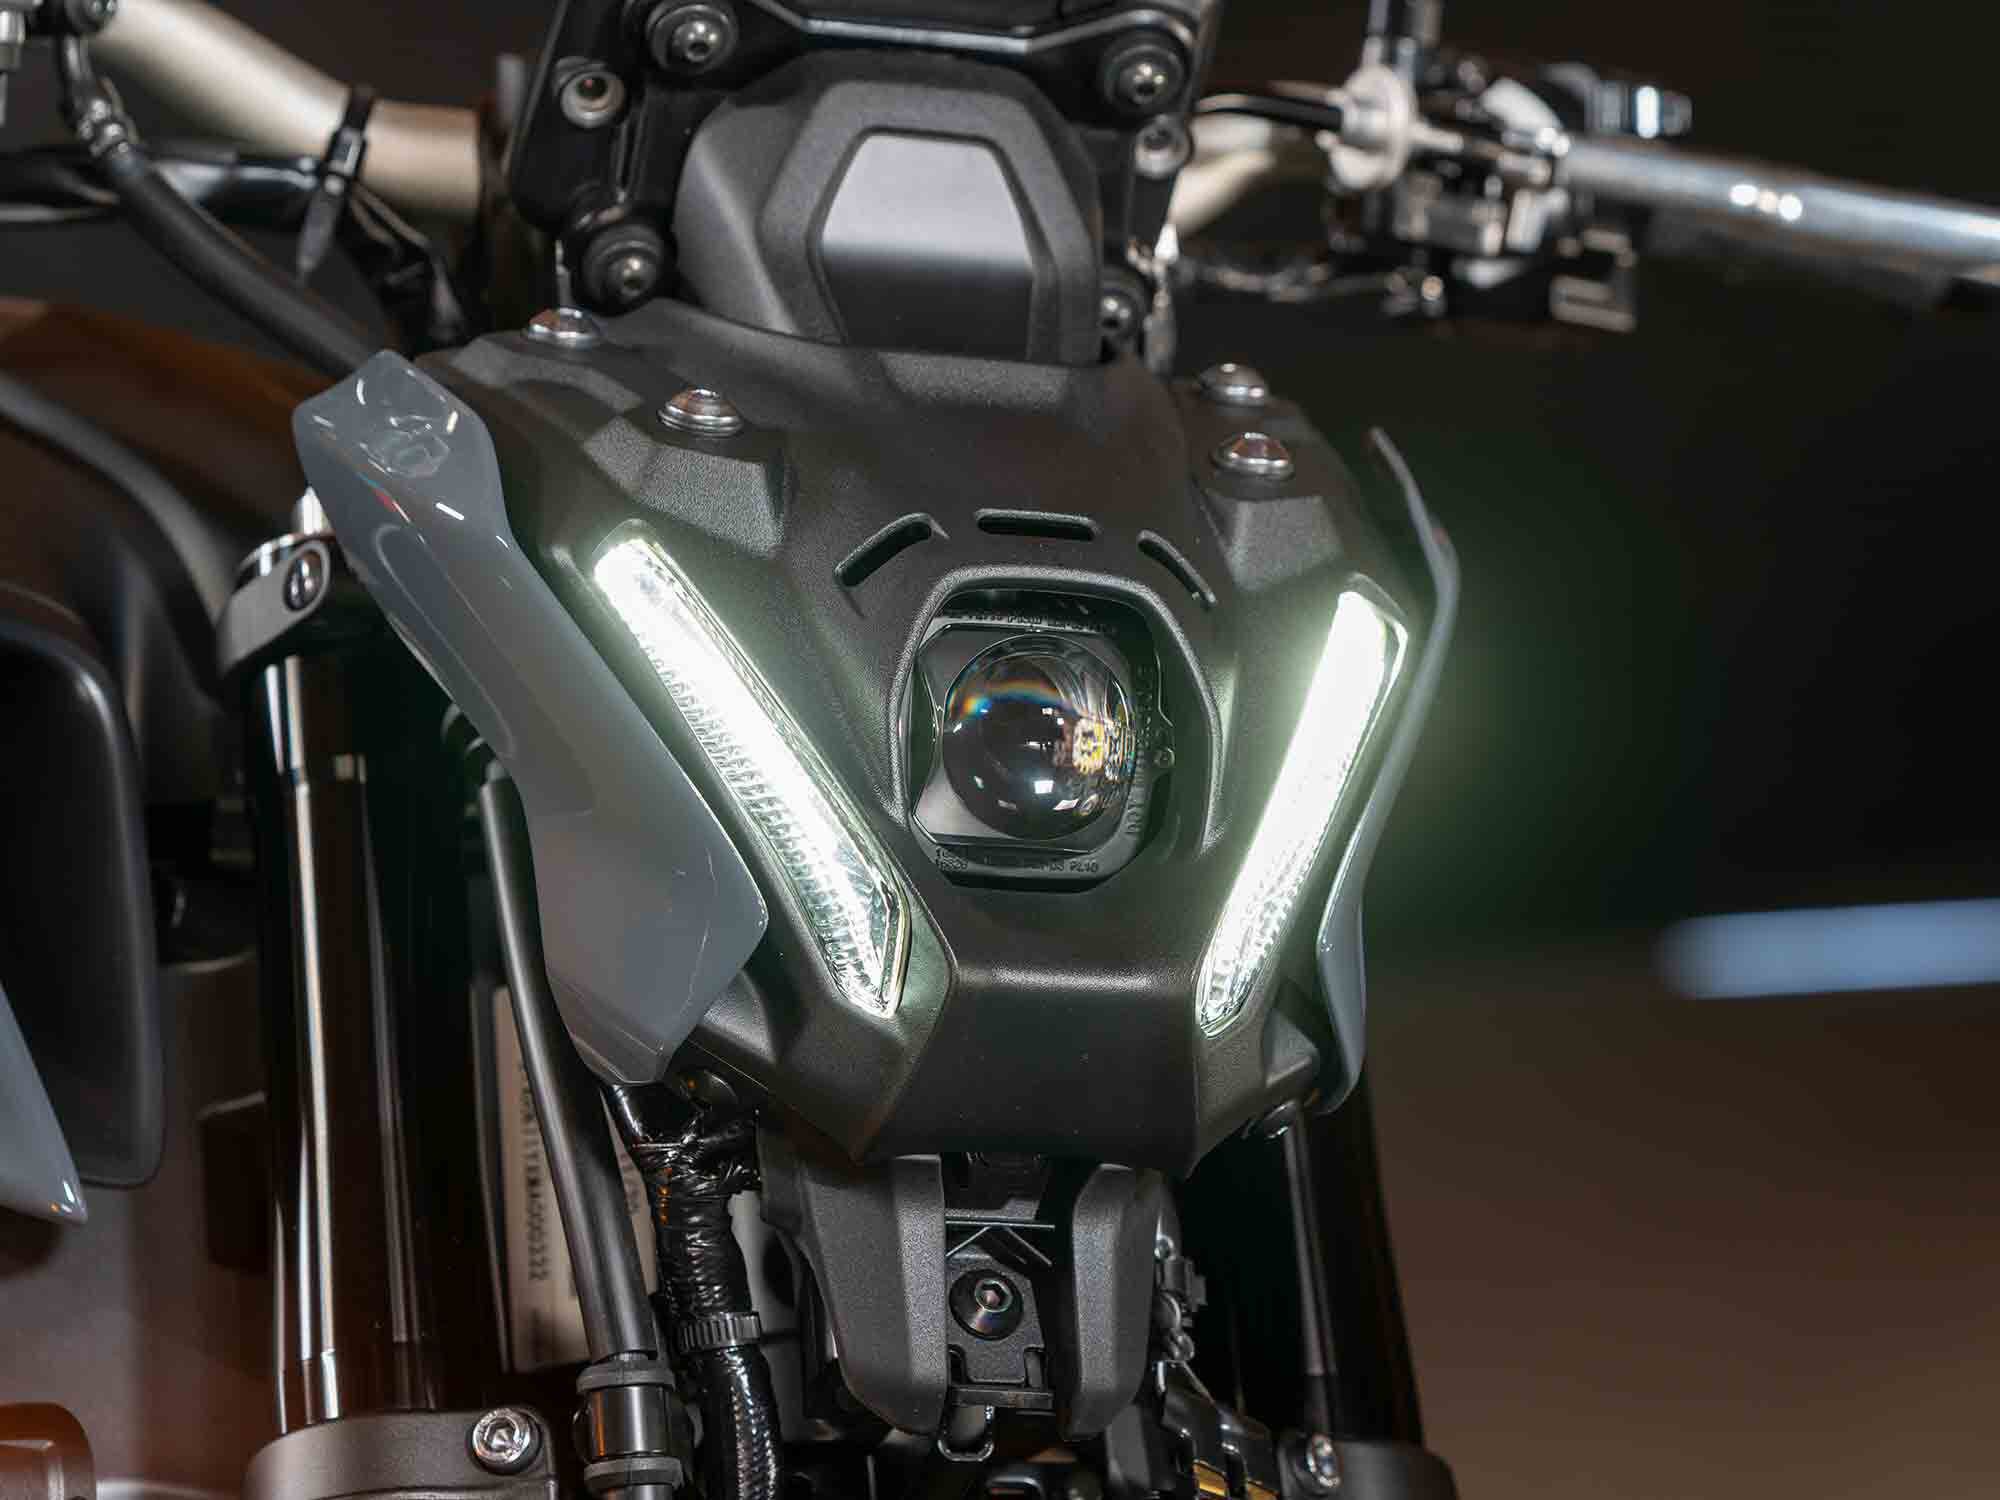 The MT-09′s headlight is a bold design to say the least, but the LED and dual-lens-in-series headlight is effective.